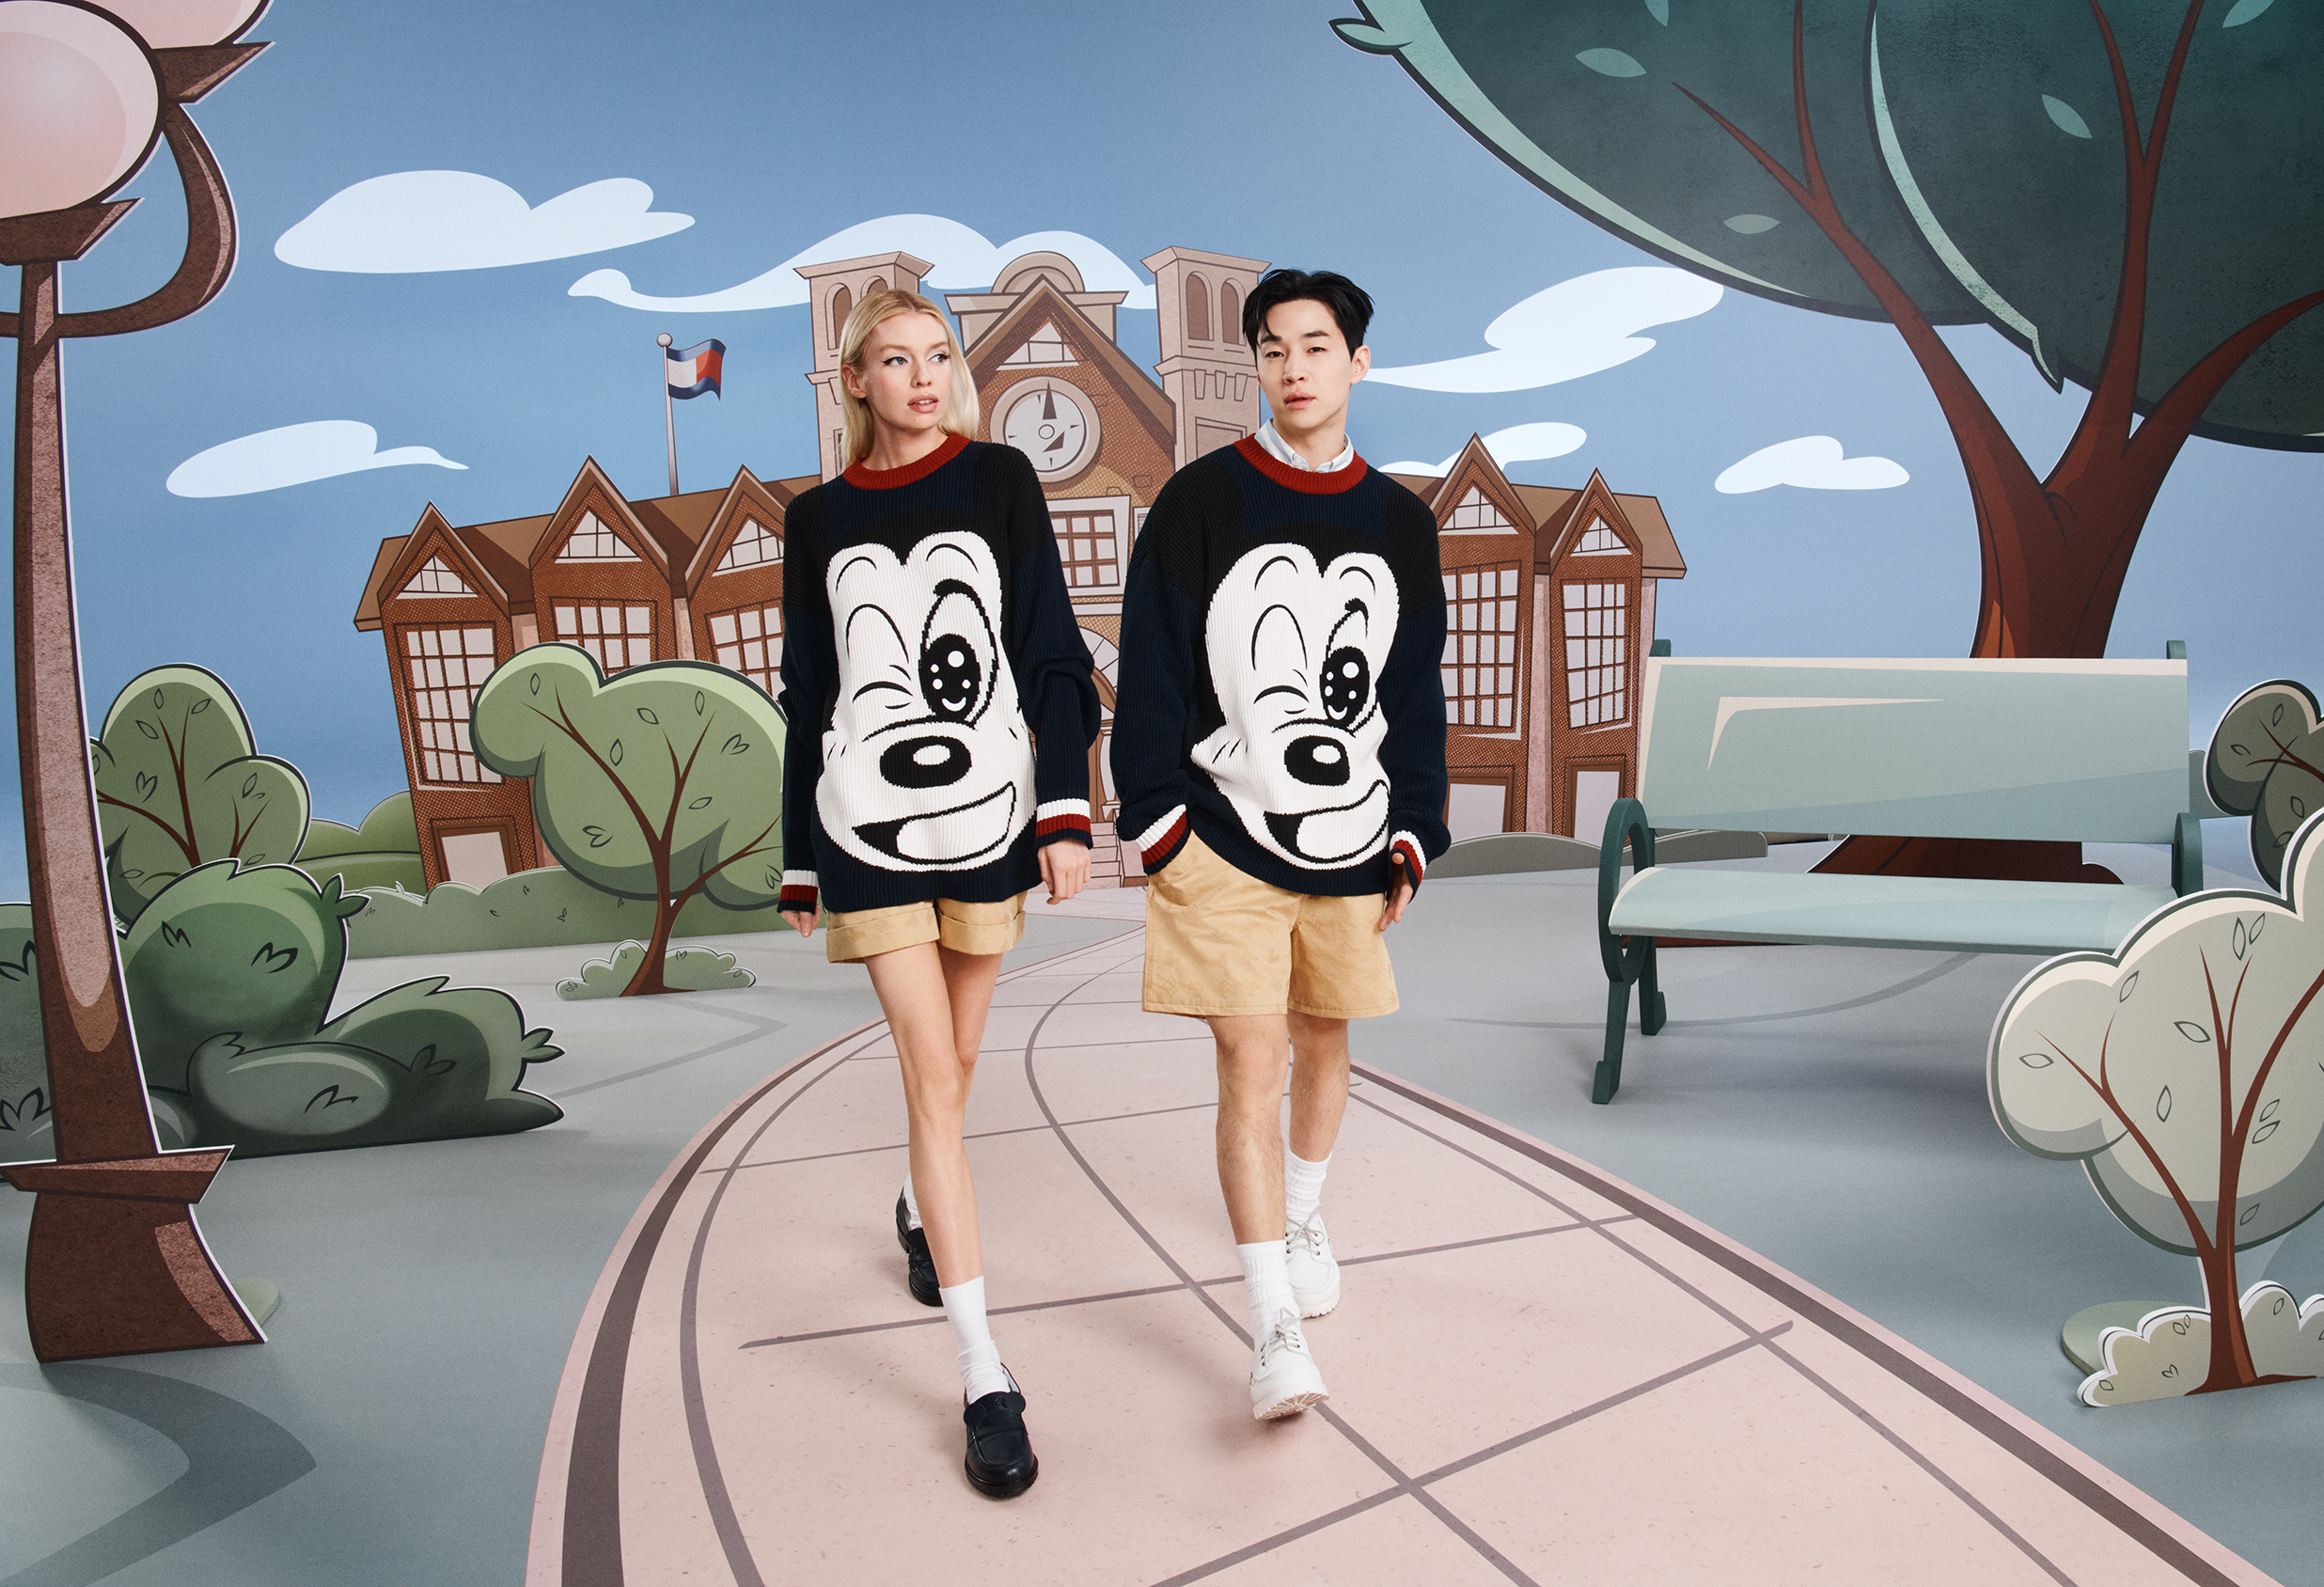 Disney Style on Instagram: Tommy Hilfiger's unique combination of